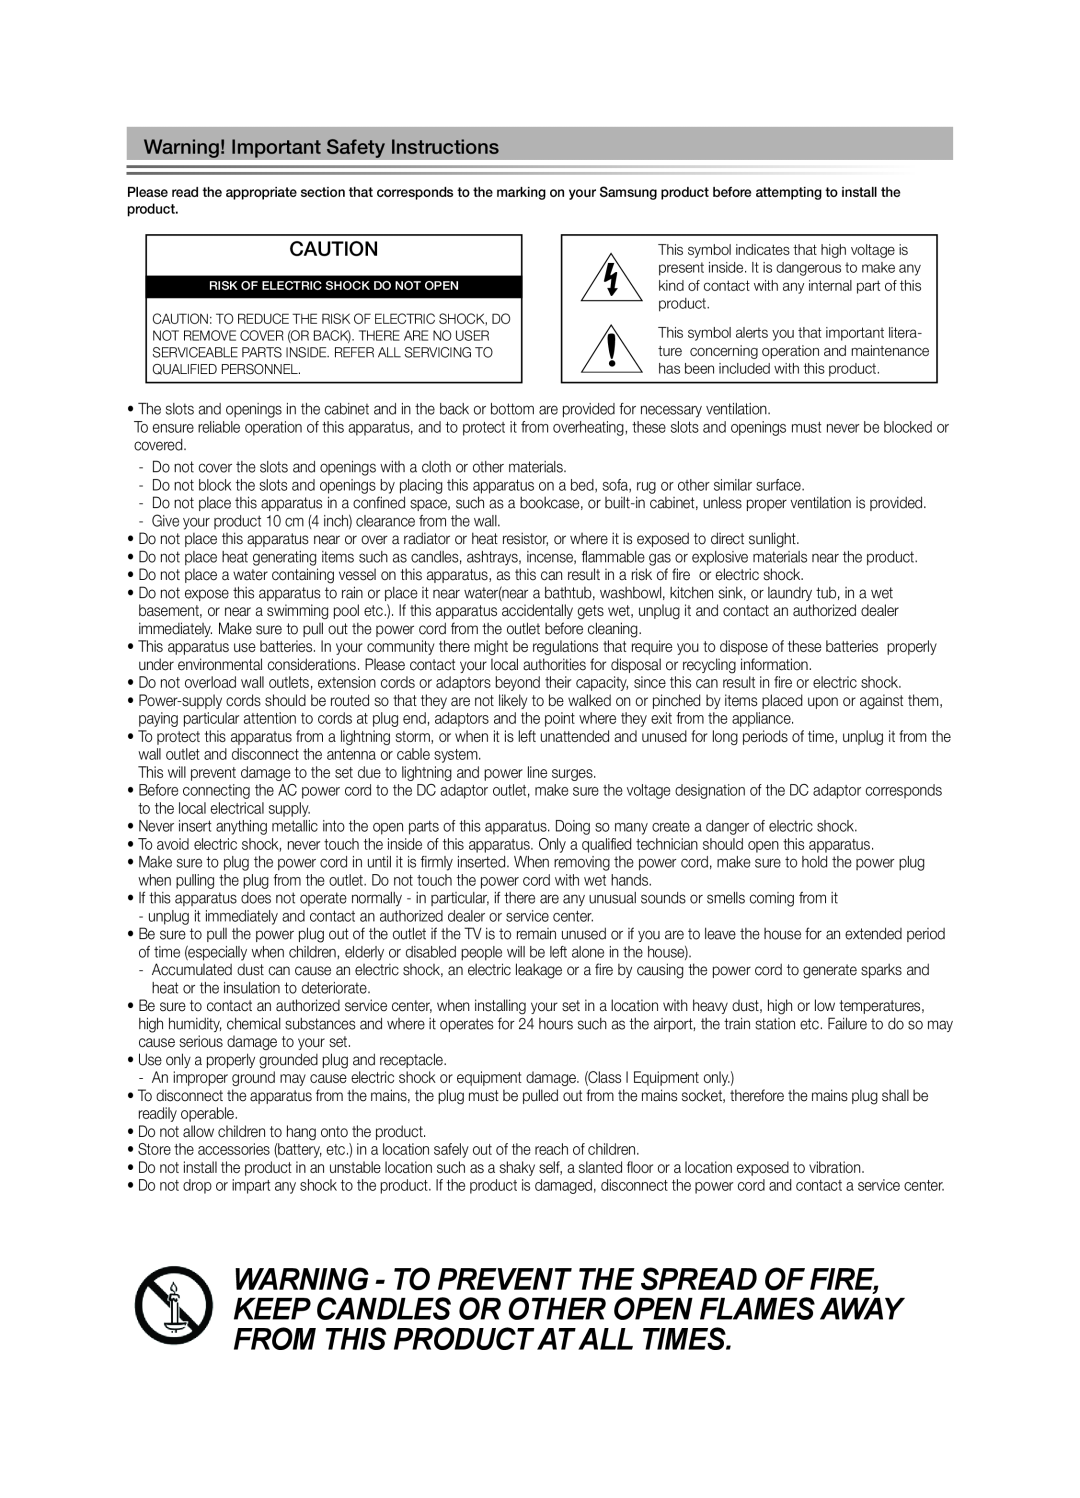 Samsung Series 5 user manual Warning! Important Safety Instructions 